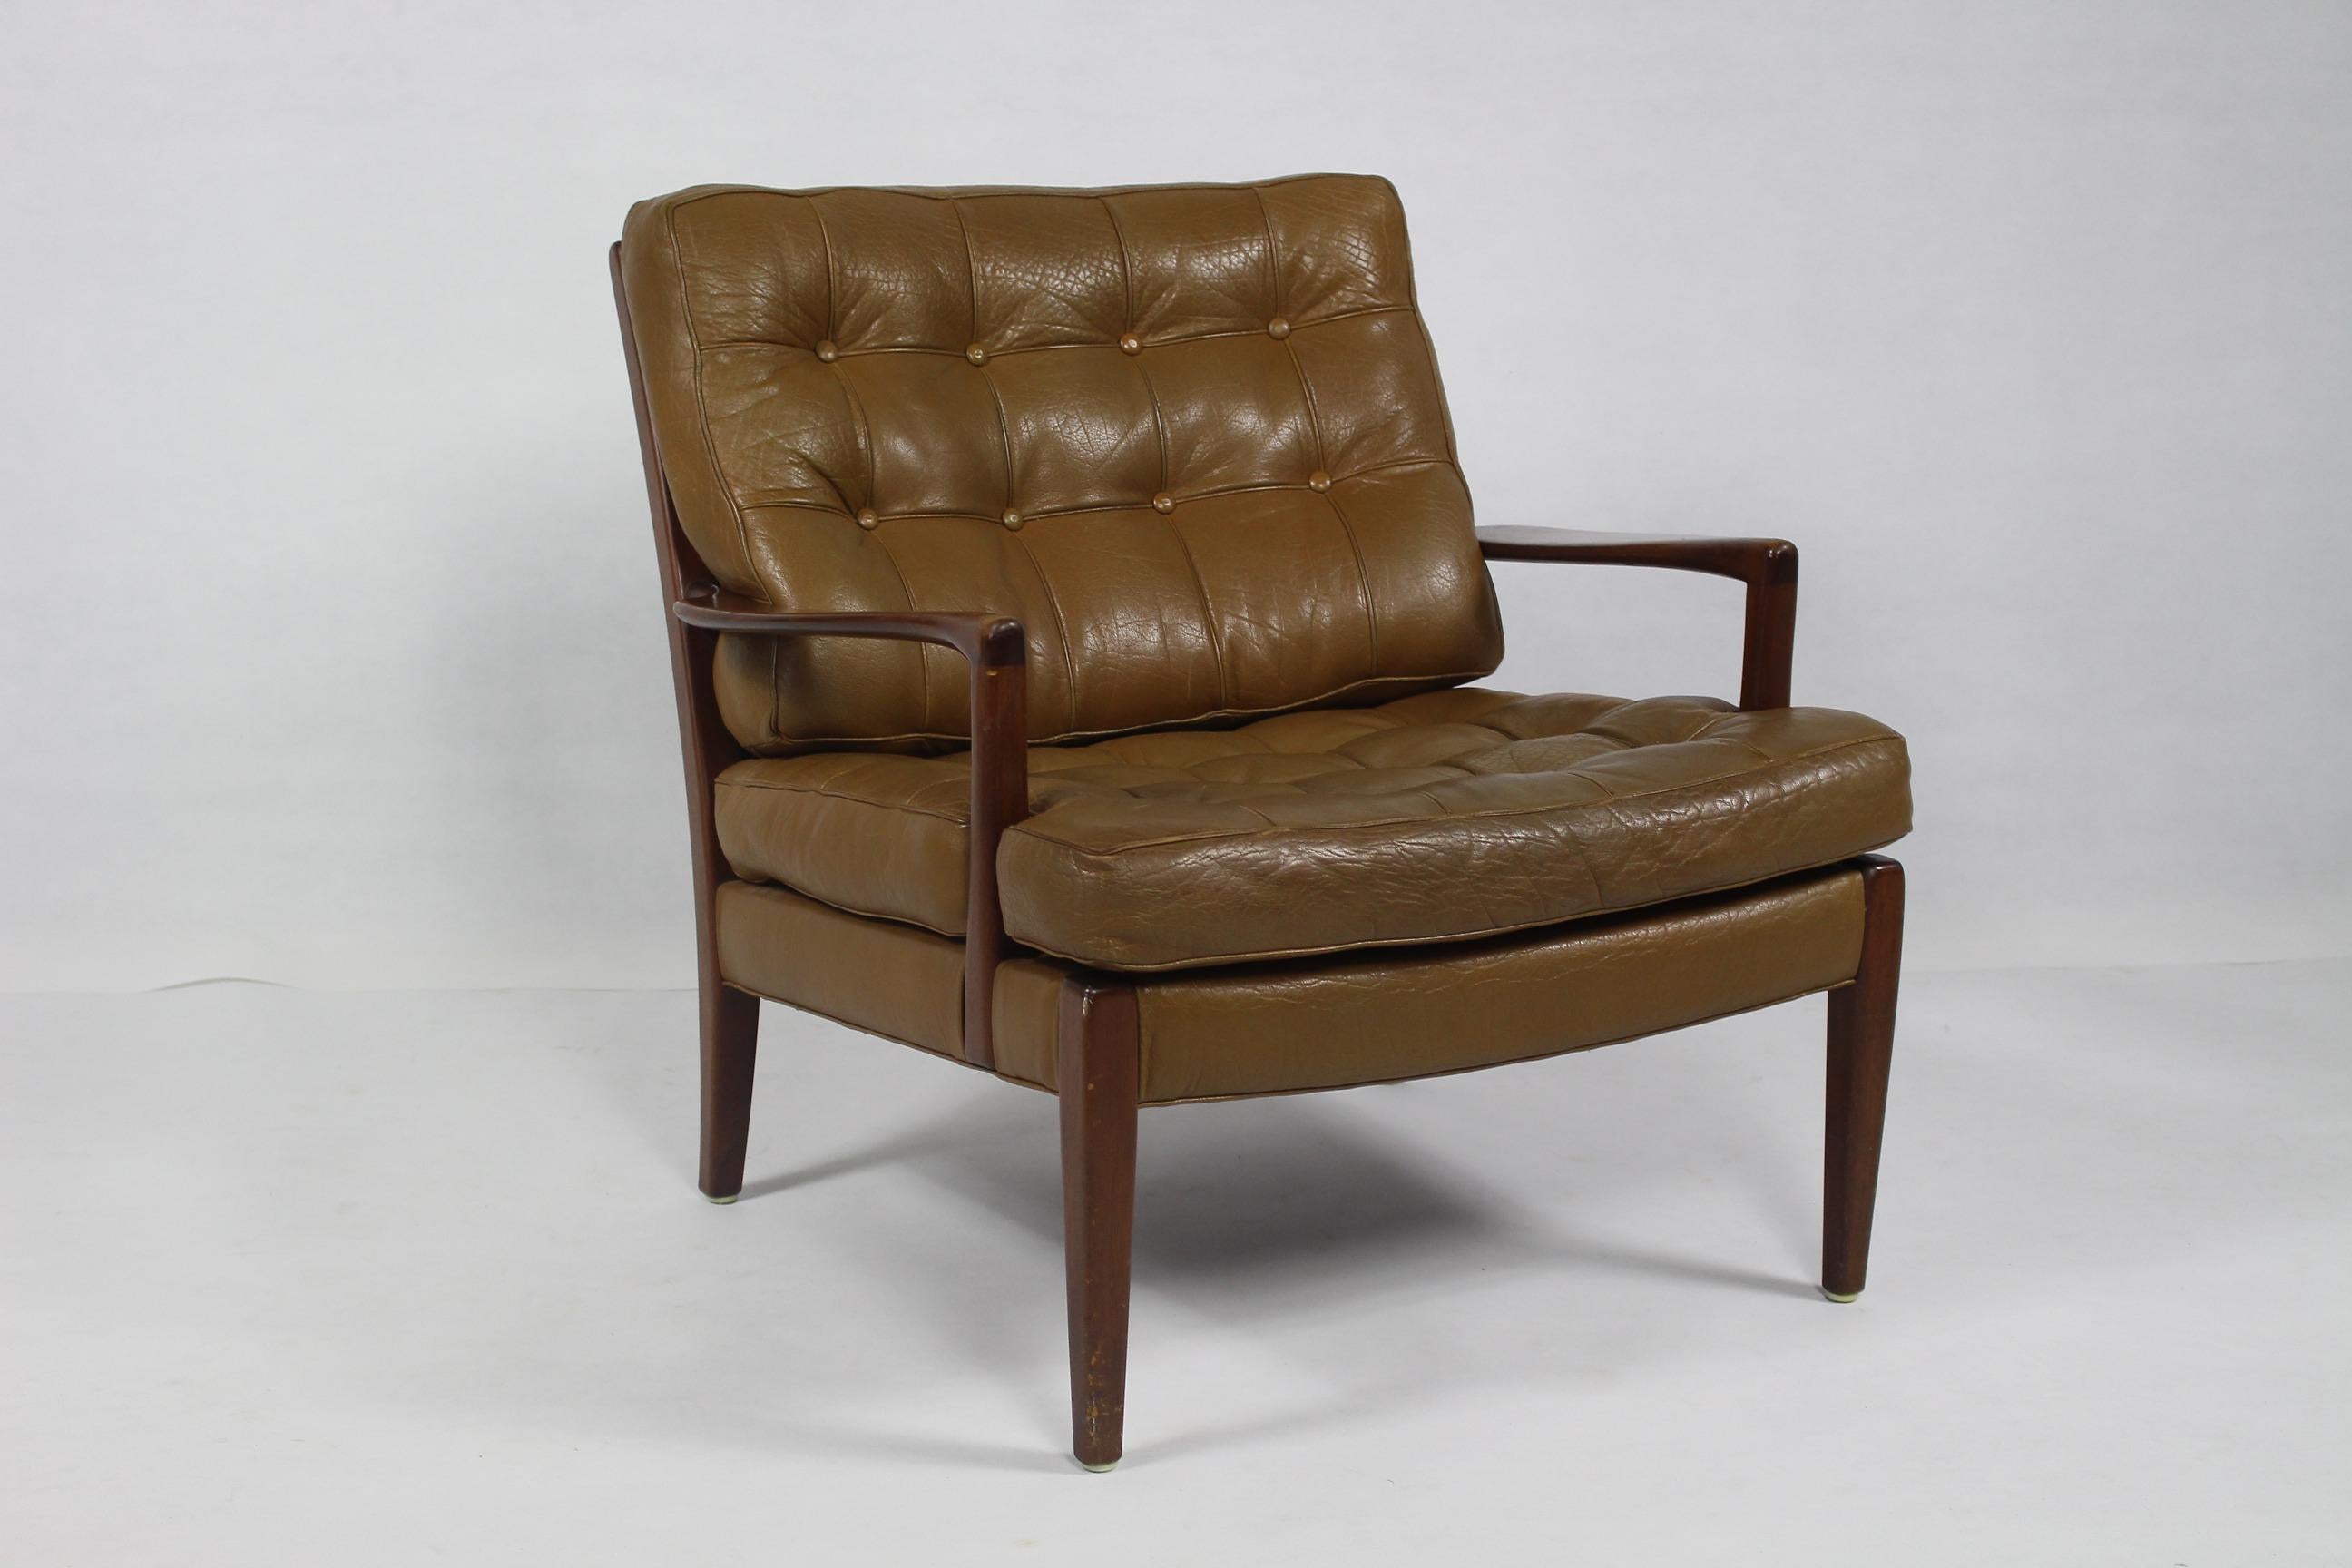 Arne Norell Lounge Chair.
Easy chair model Löven designed by Arne Norell.
Produced by Arne Norell AB in Aneby, Sweden, 1960s.
Original buffalo leather.
Good original condition.